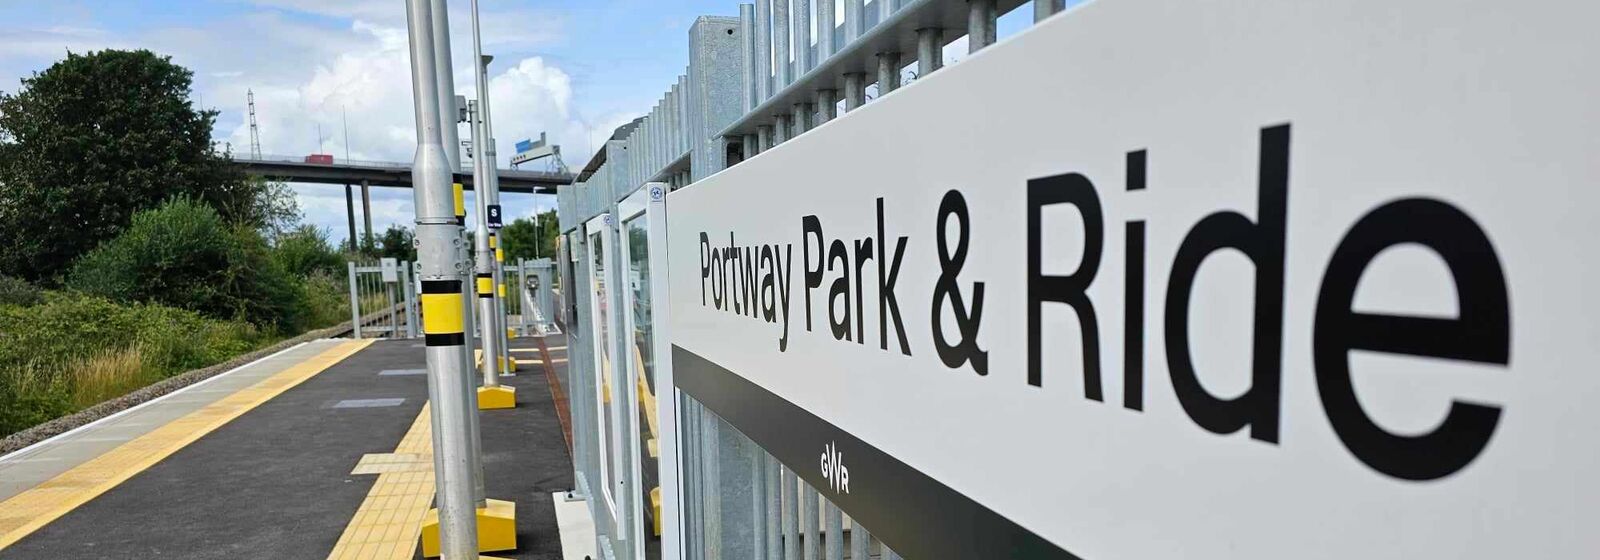 Portway Park and Ride sign at a train station